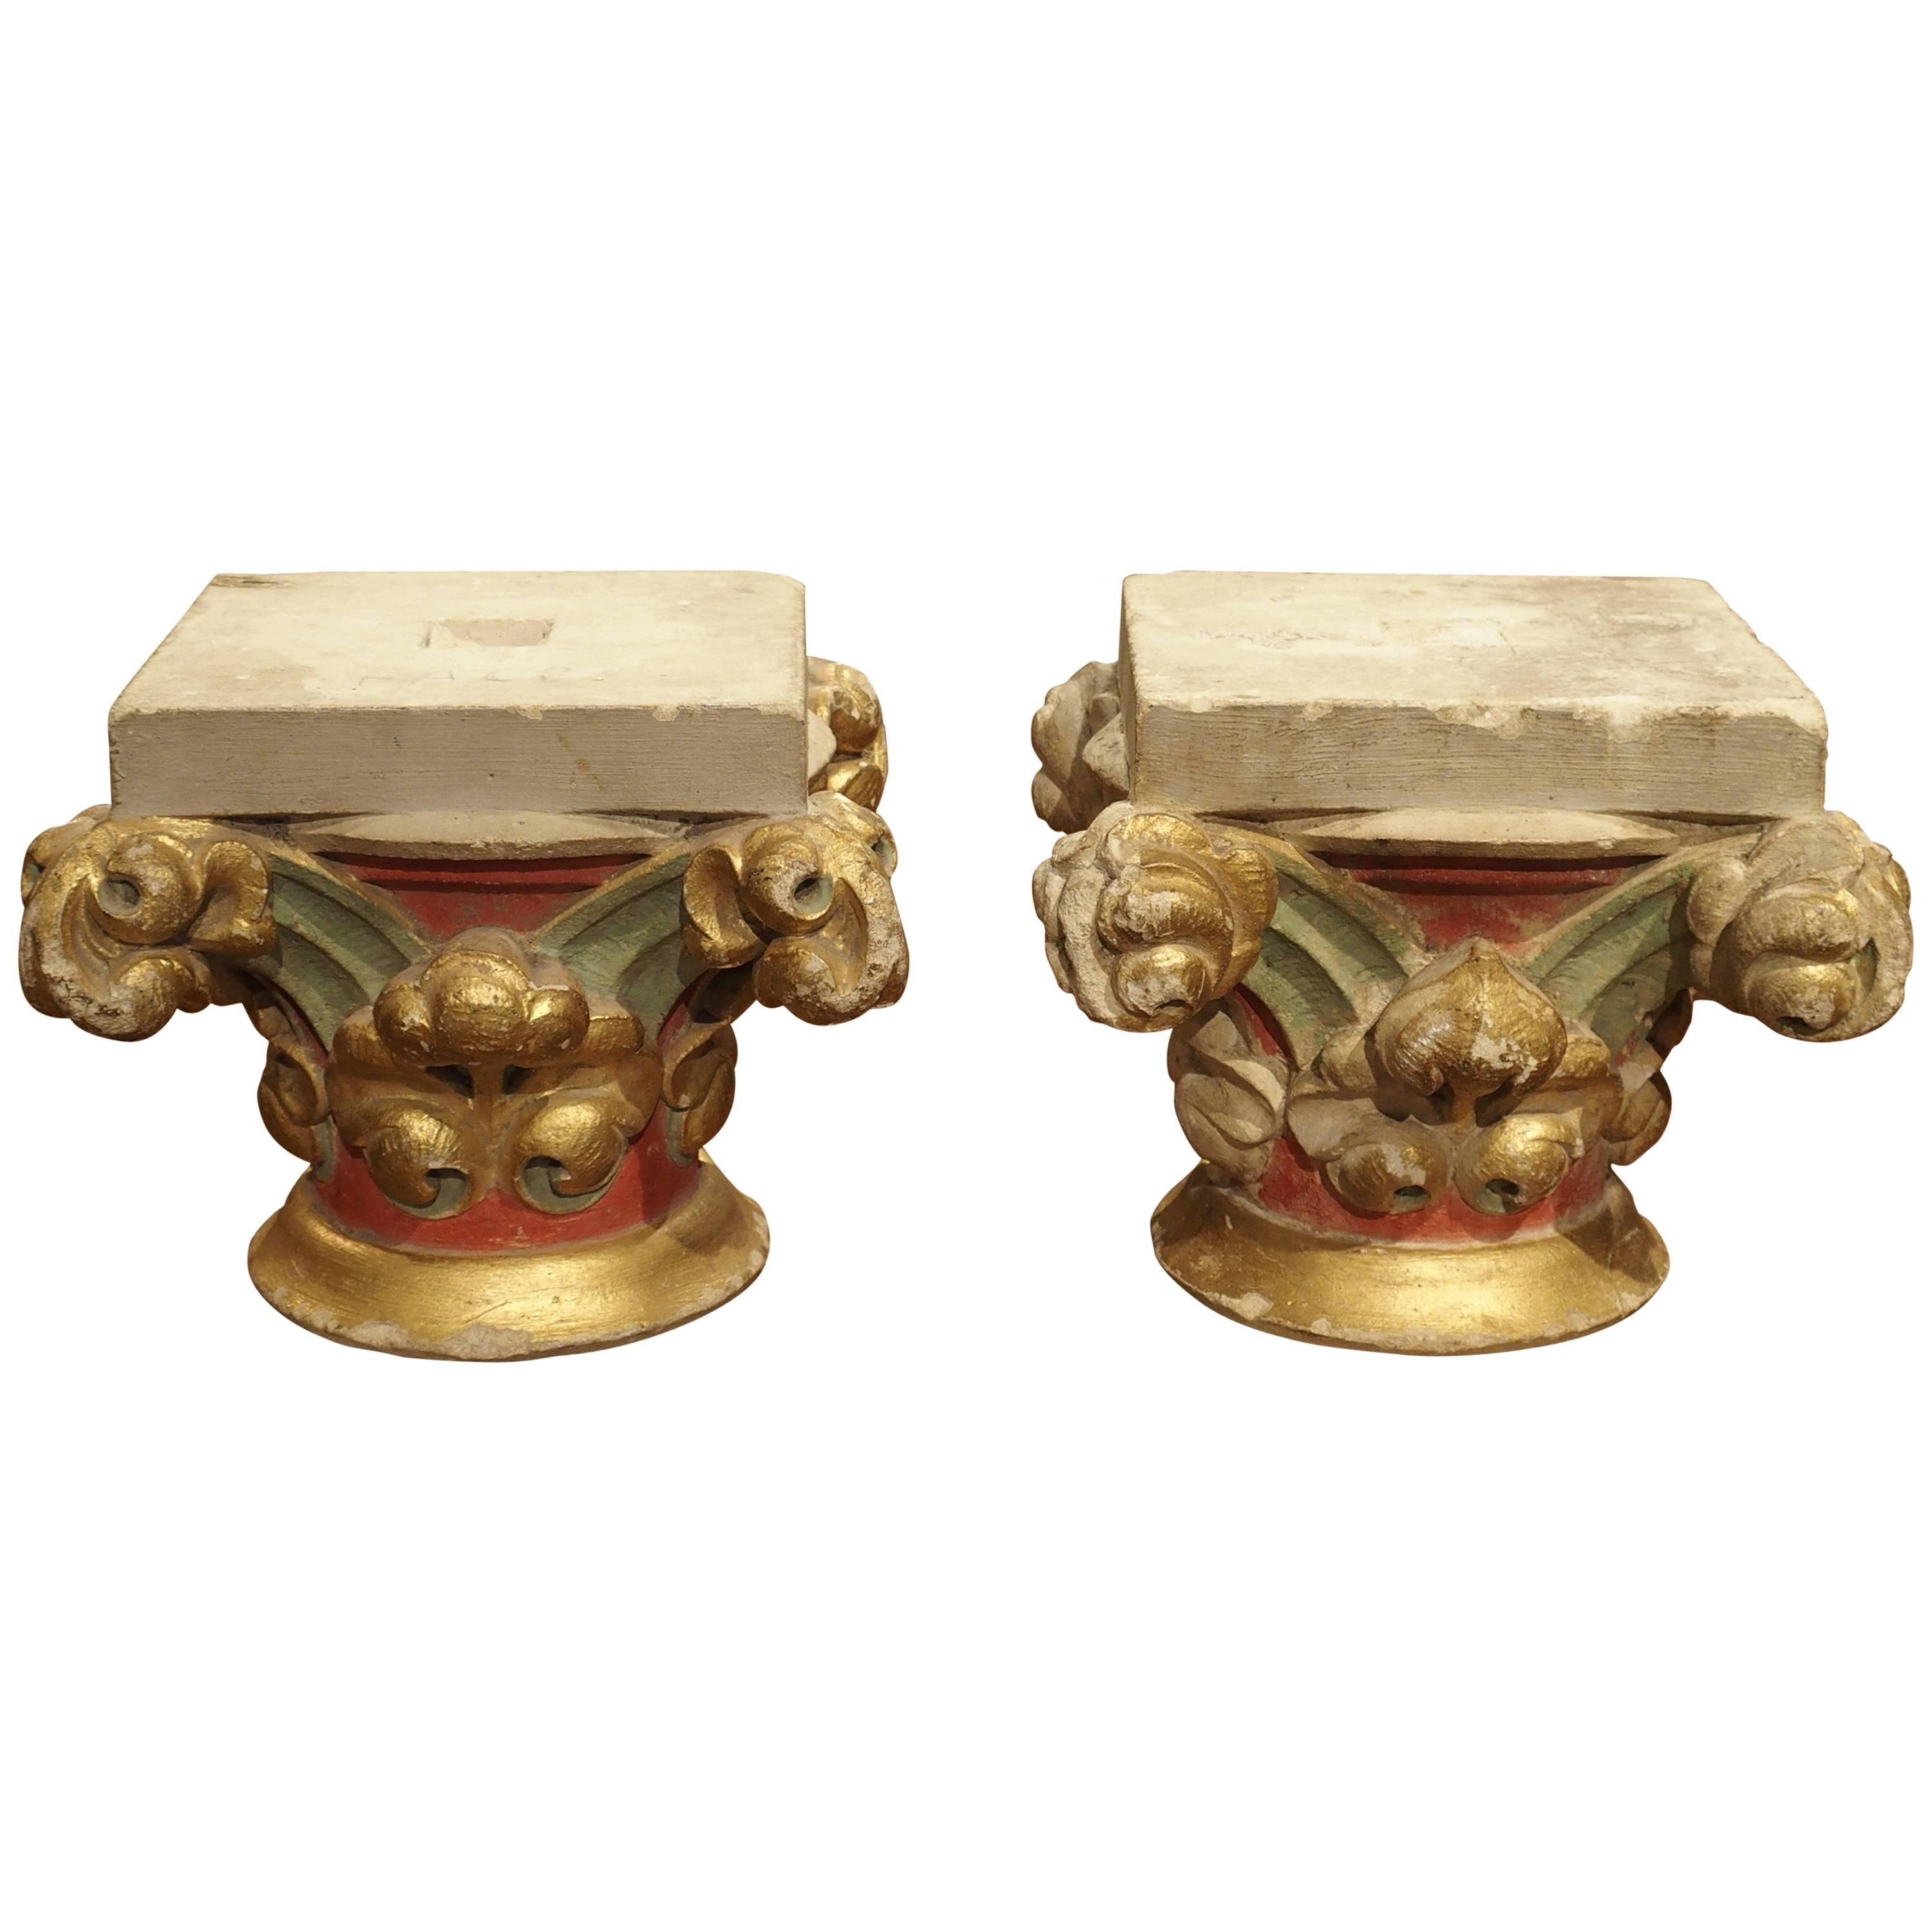 Pair of Small Painted Antique Stone Capitals from France, 1800s